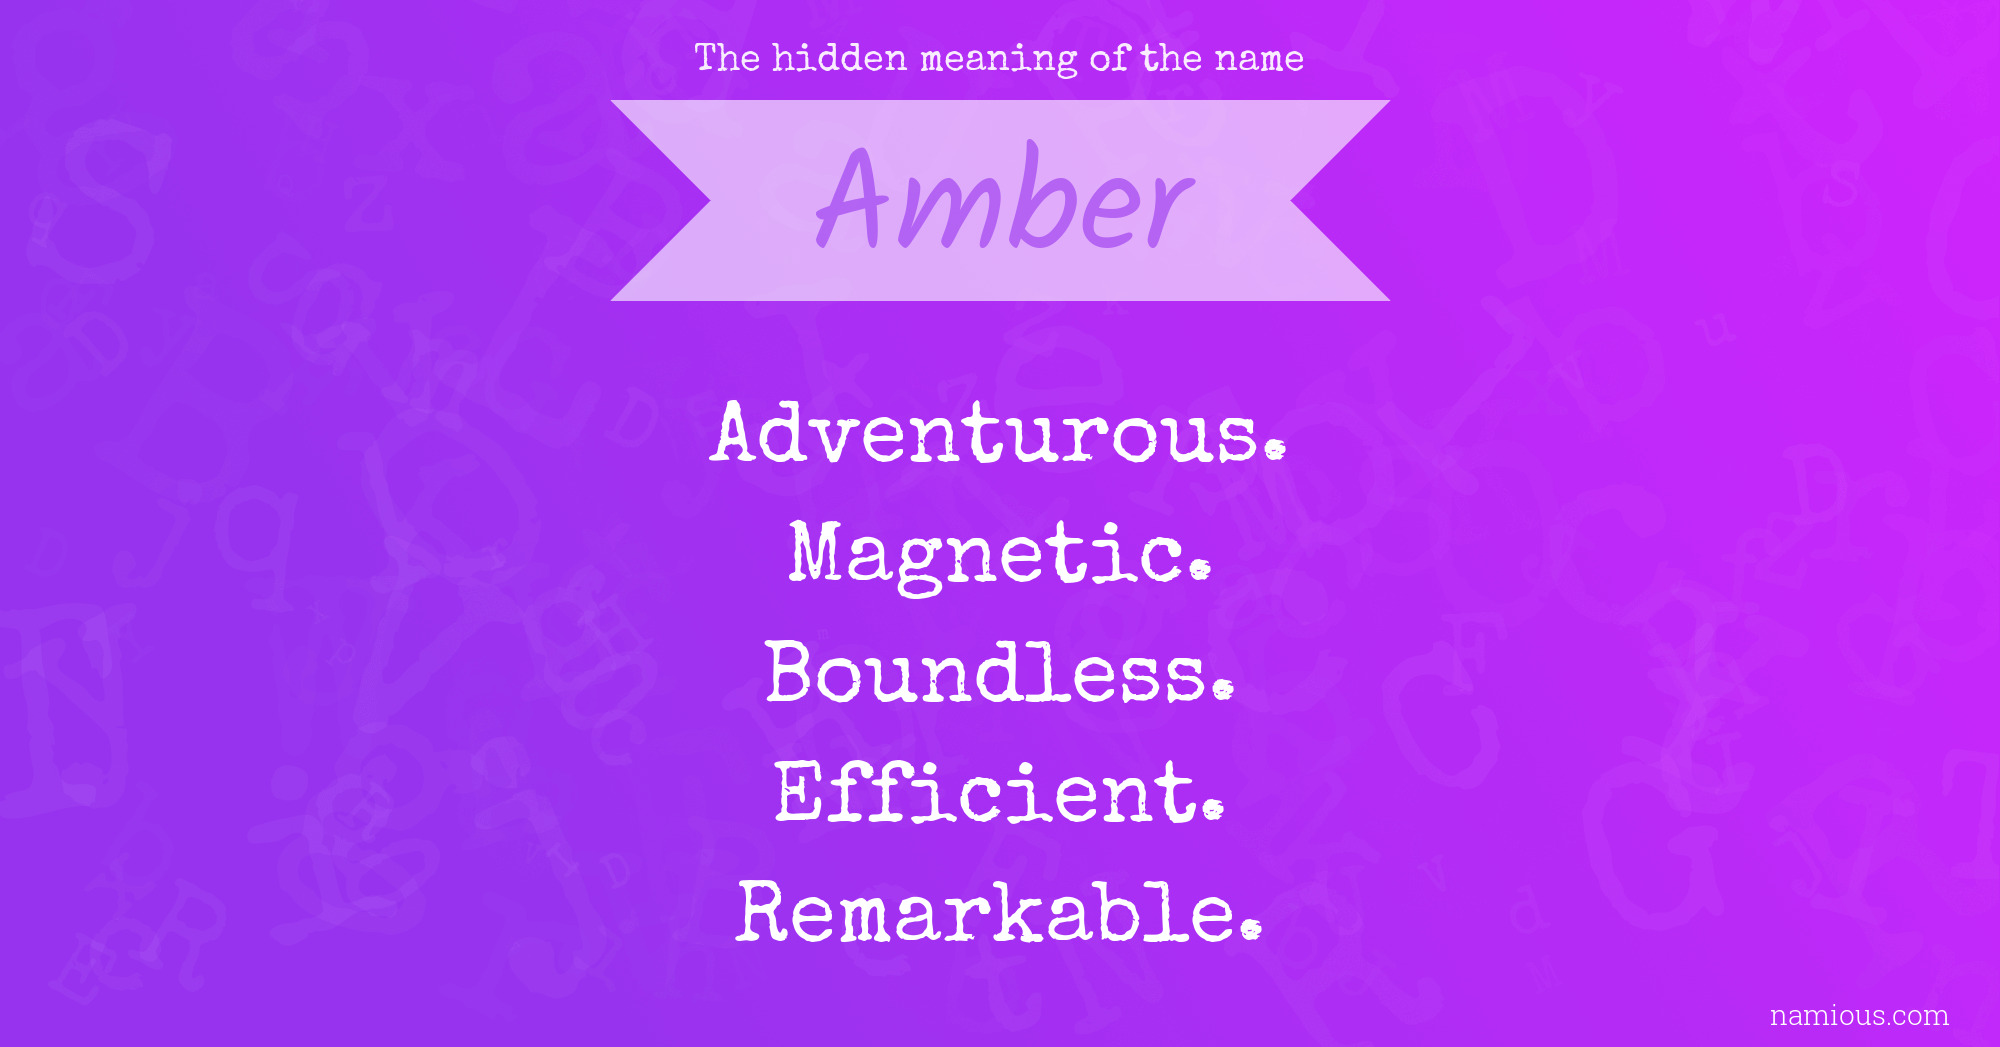 The hidden meaning of the name Amber